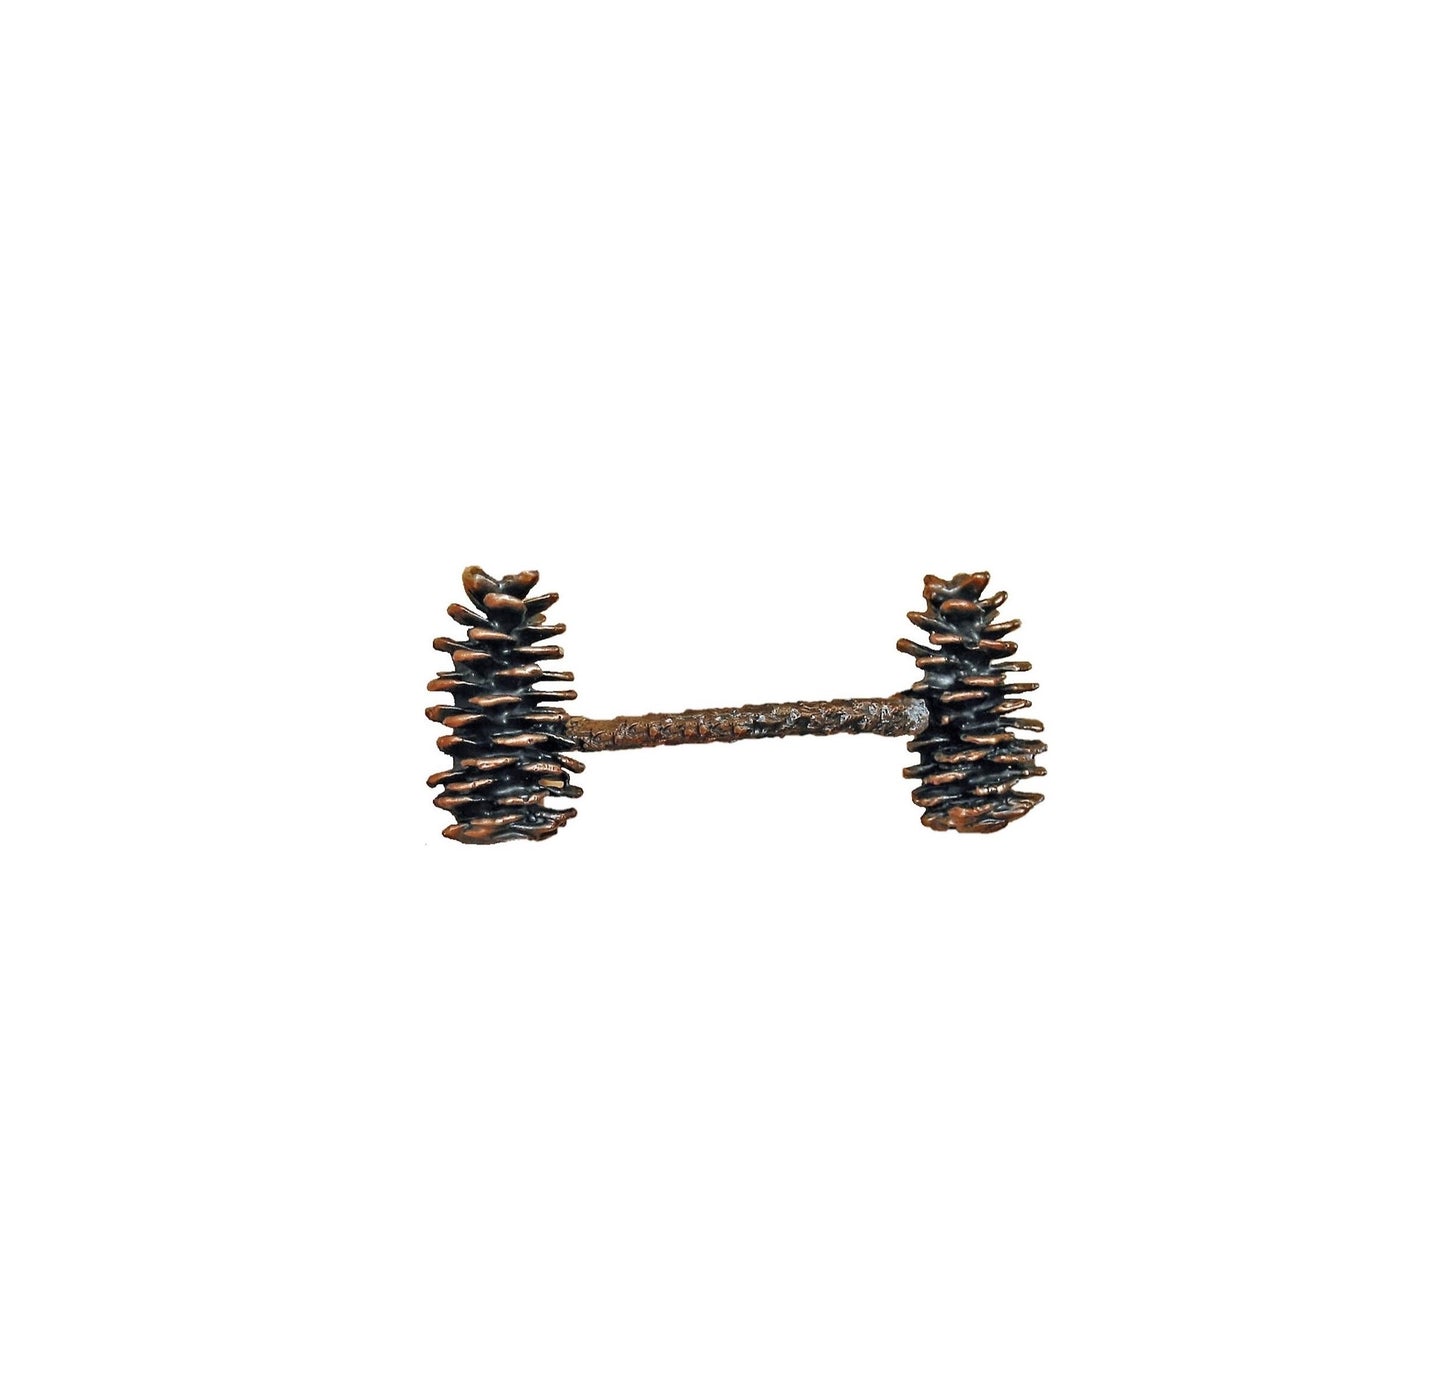 Rustic Spruce cone drawer handle - solid bronze